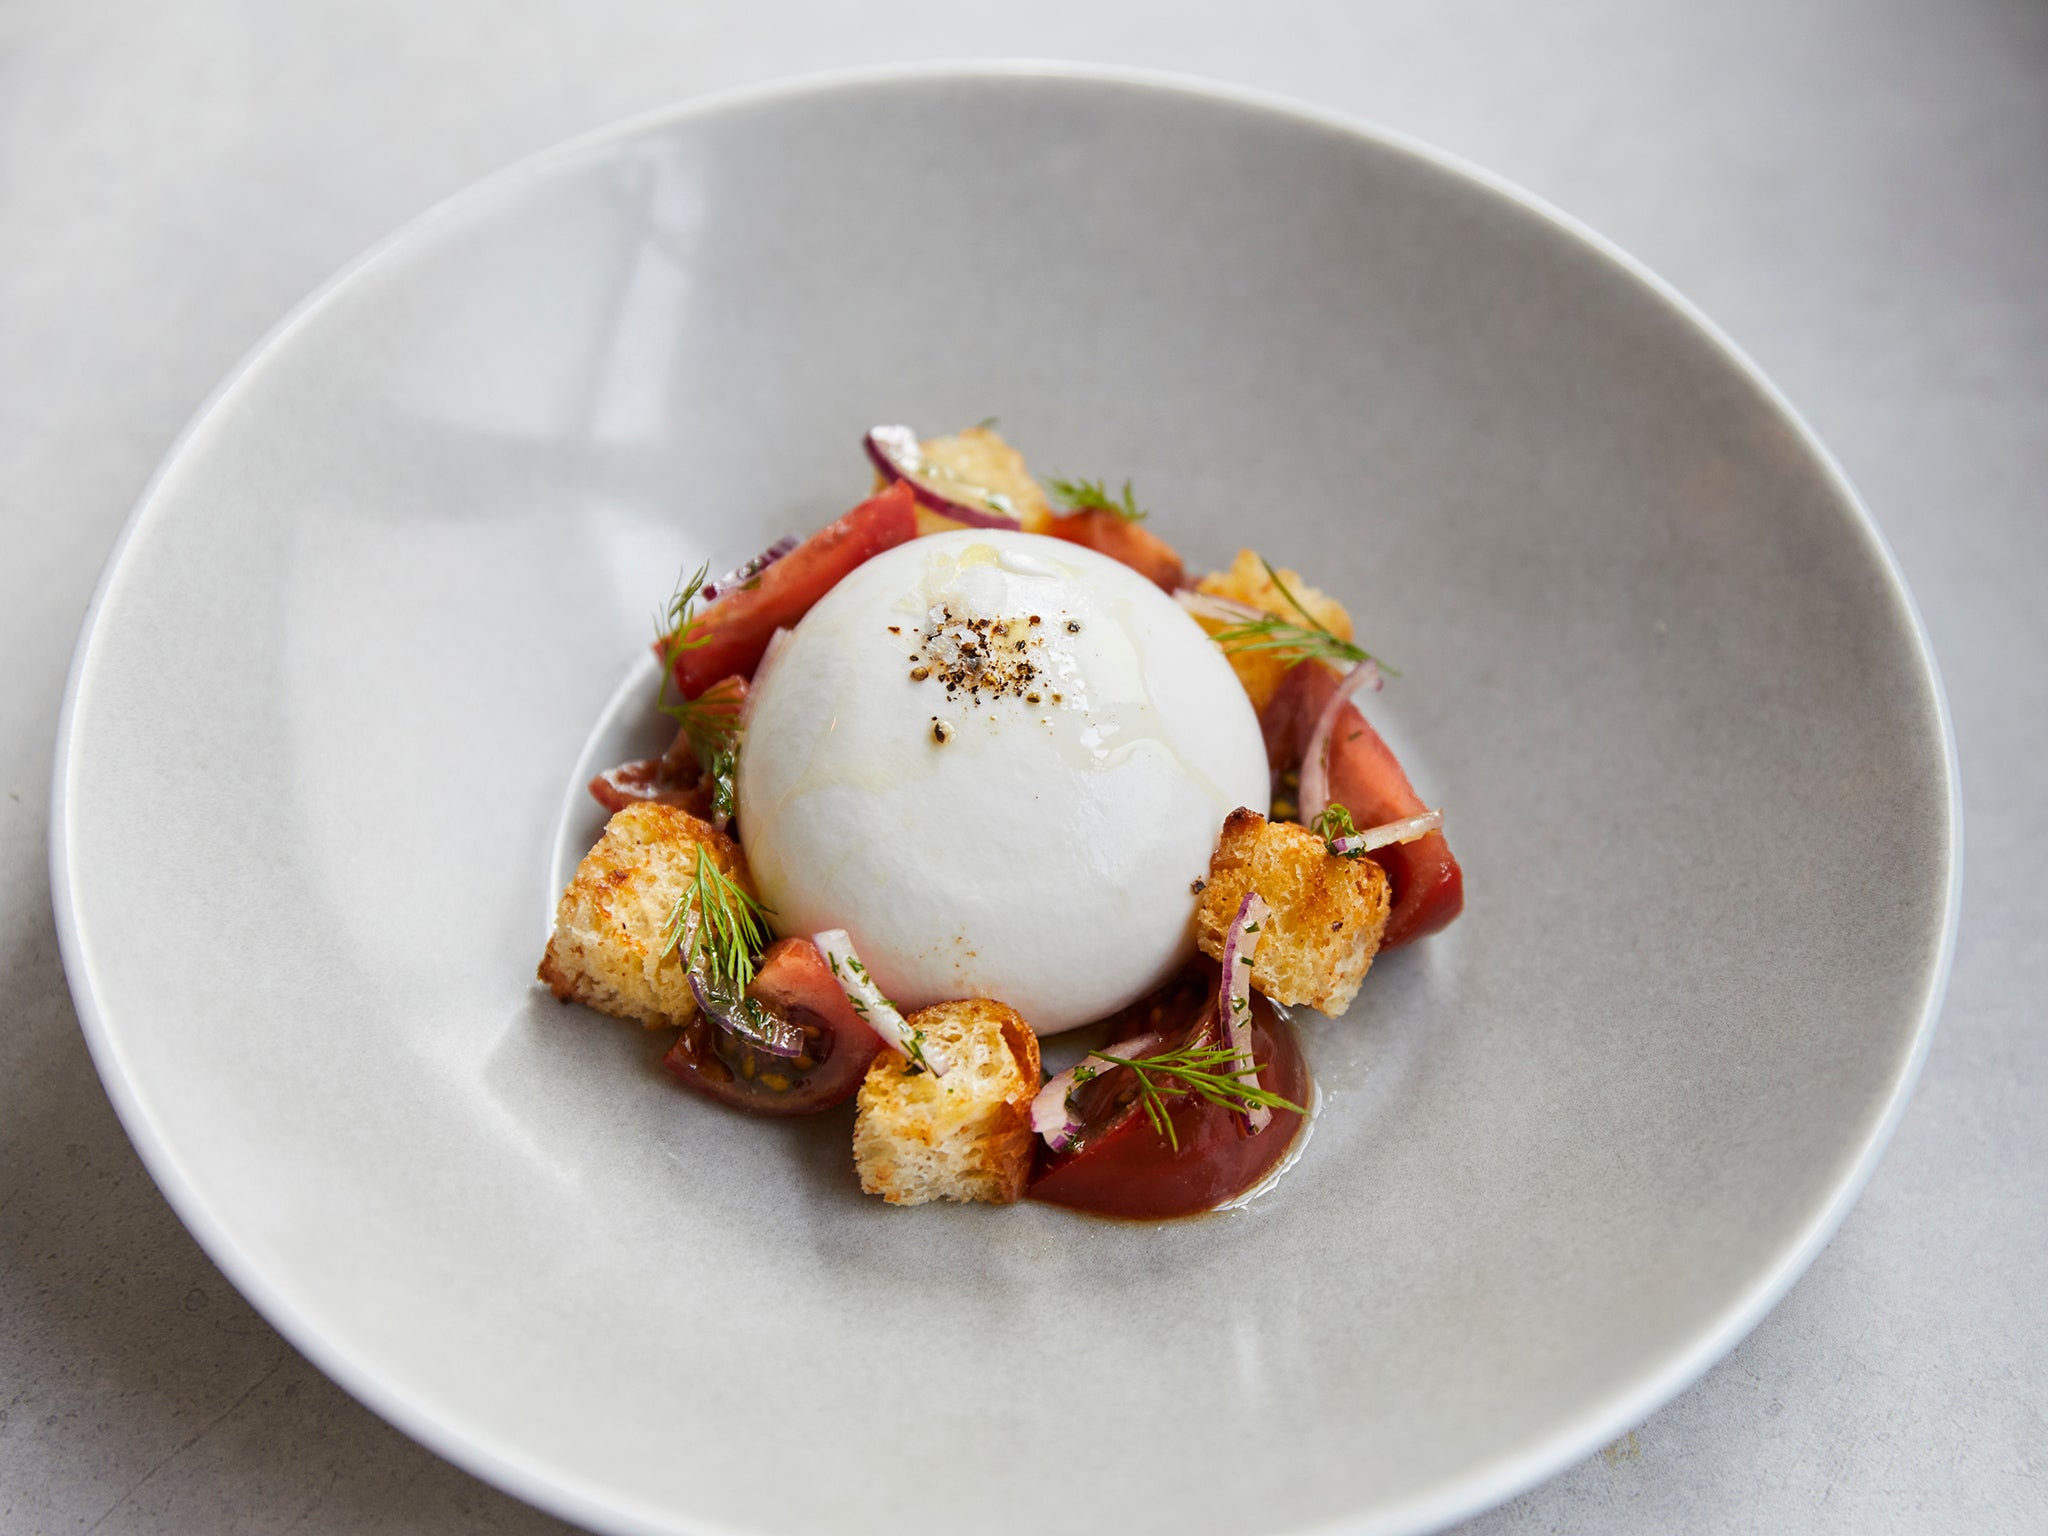 Combine two of your favourite things in this panzanella with burrata